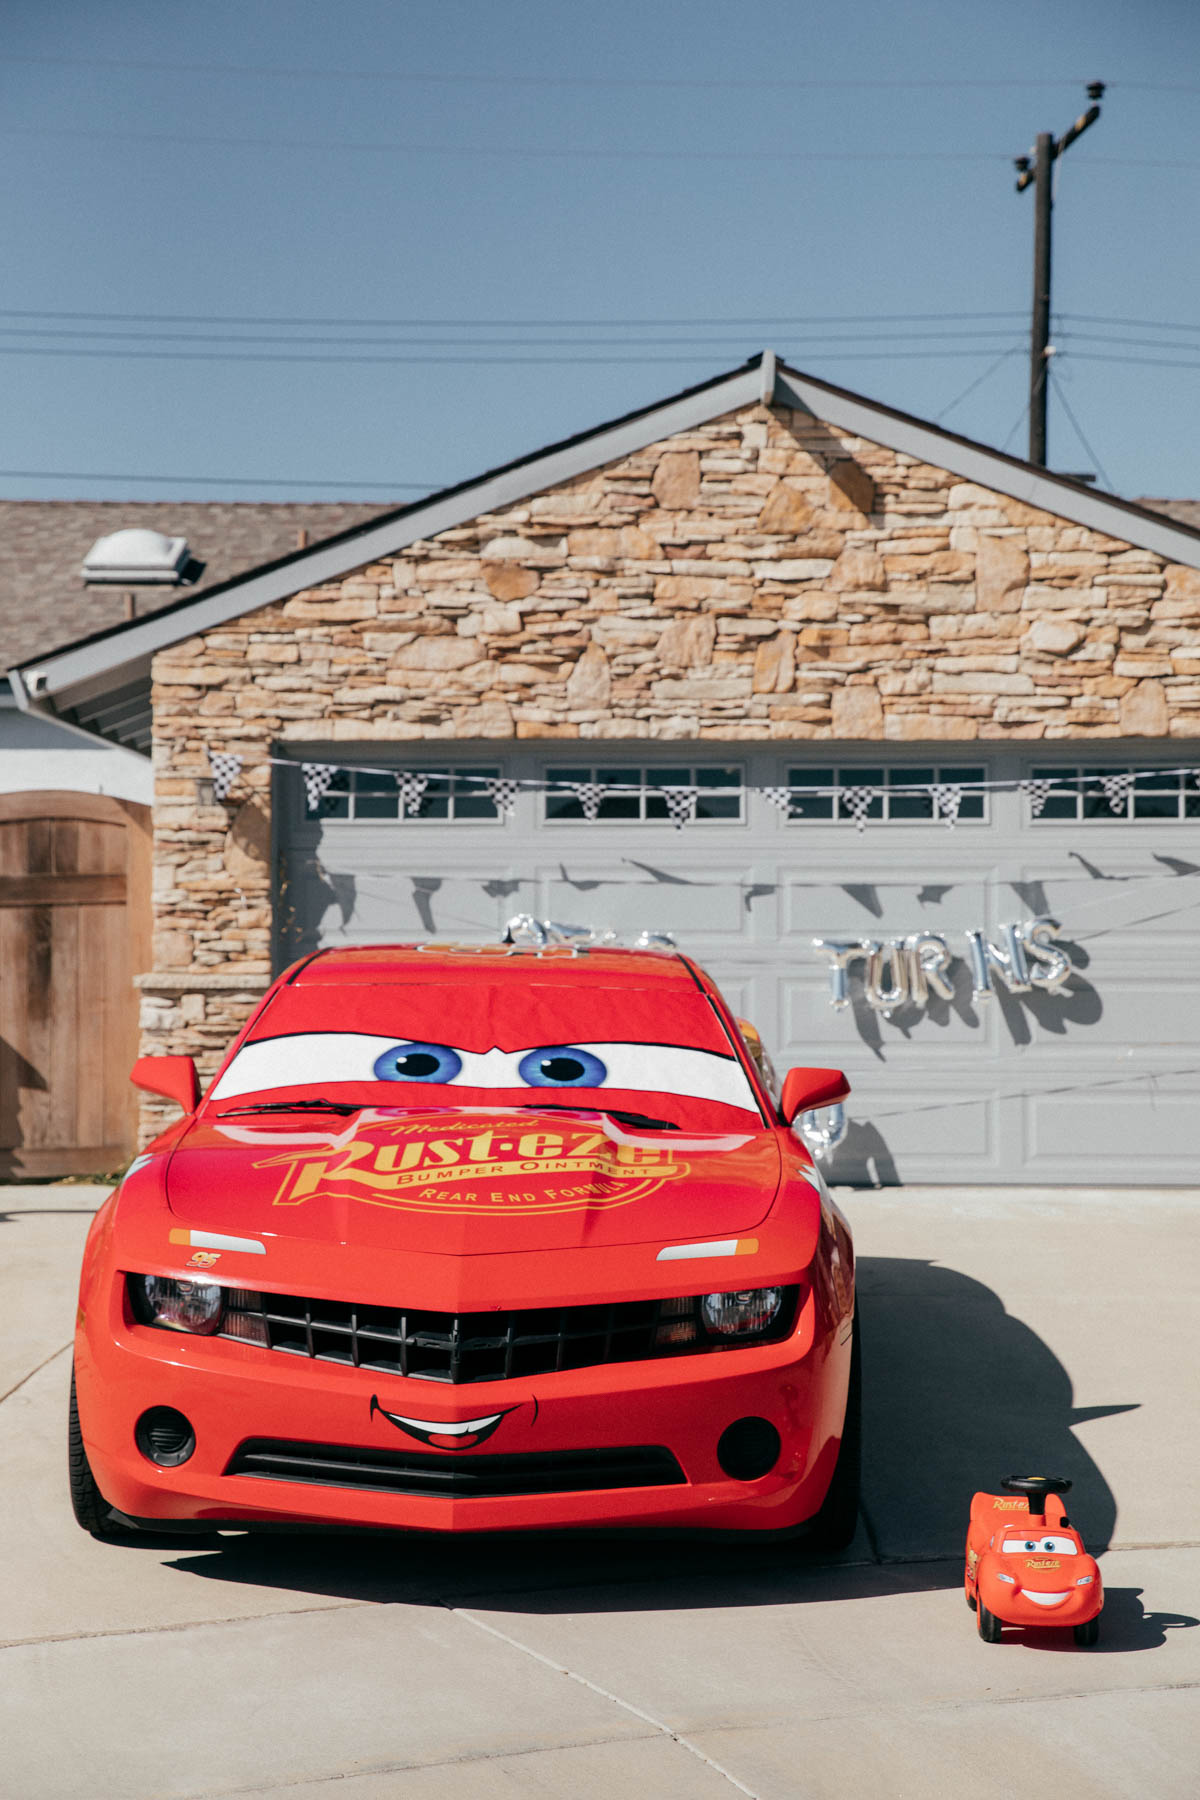 Lightning McQueen Impersonator Car and Ride on Lightning McQueen Car Toy at Disney Pixar Cars themed birthday